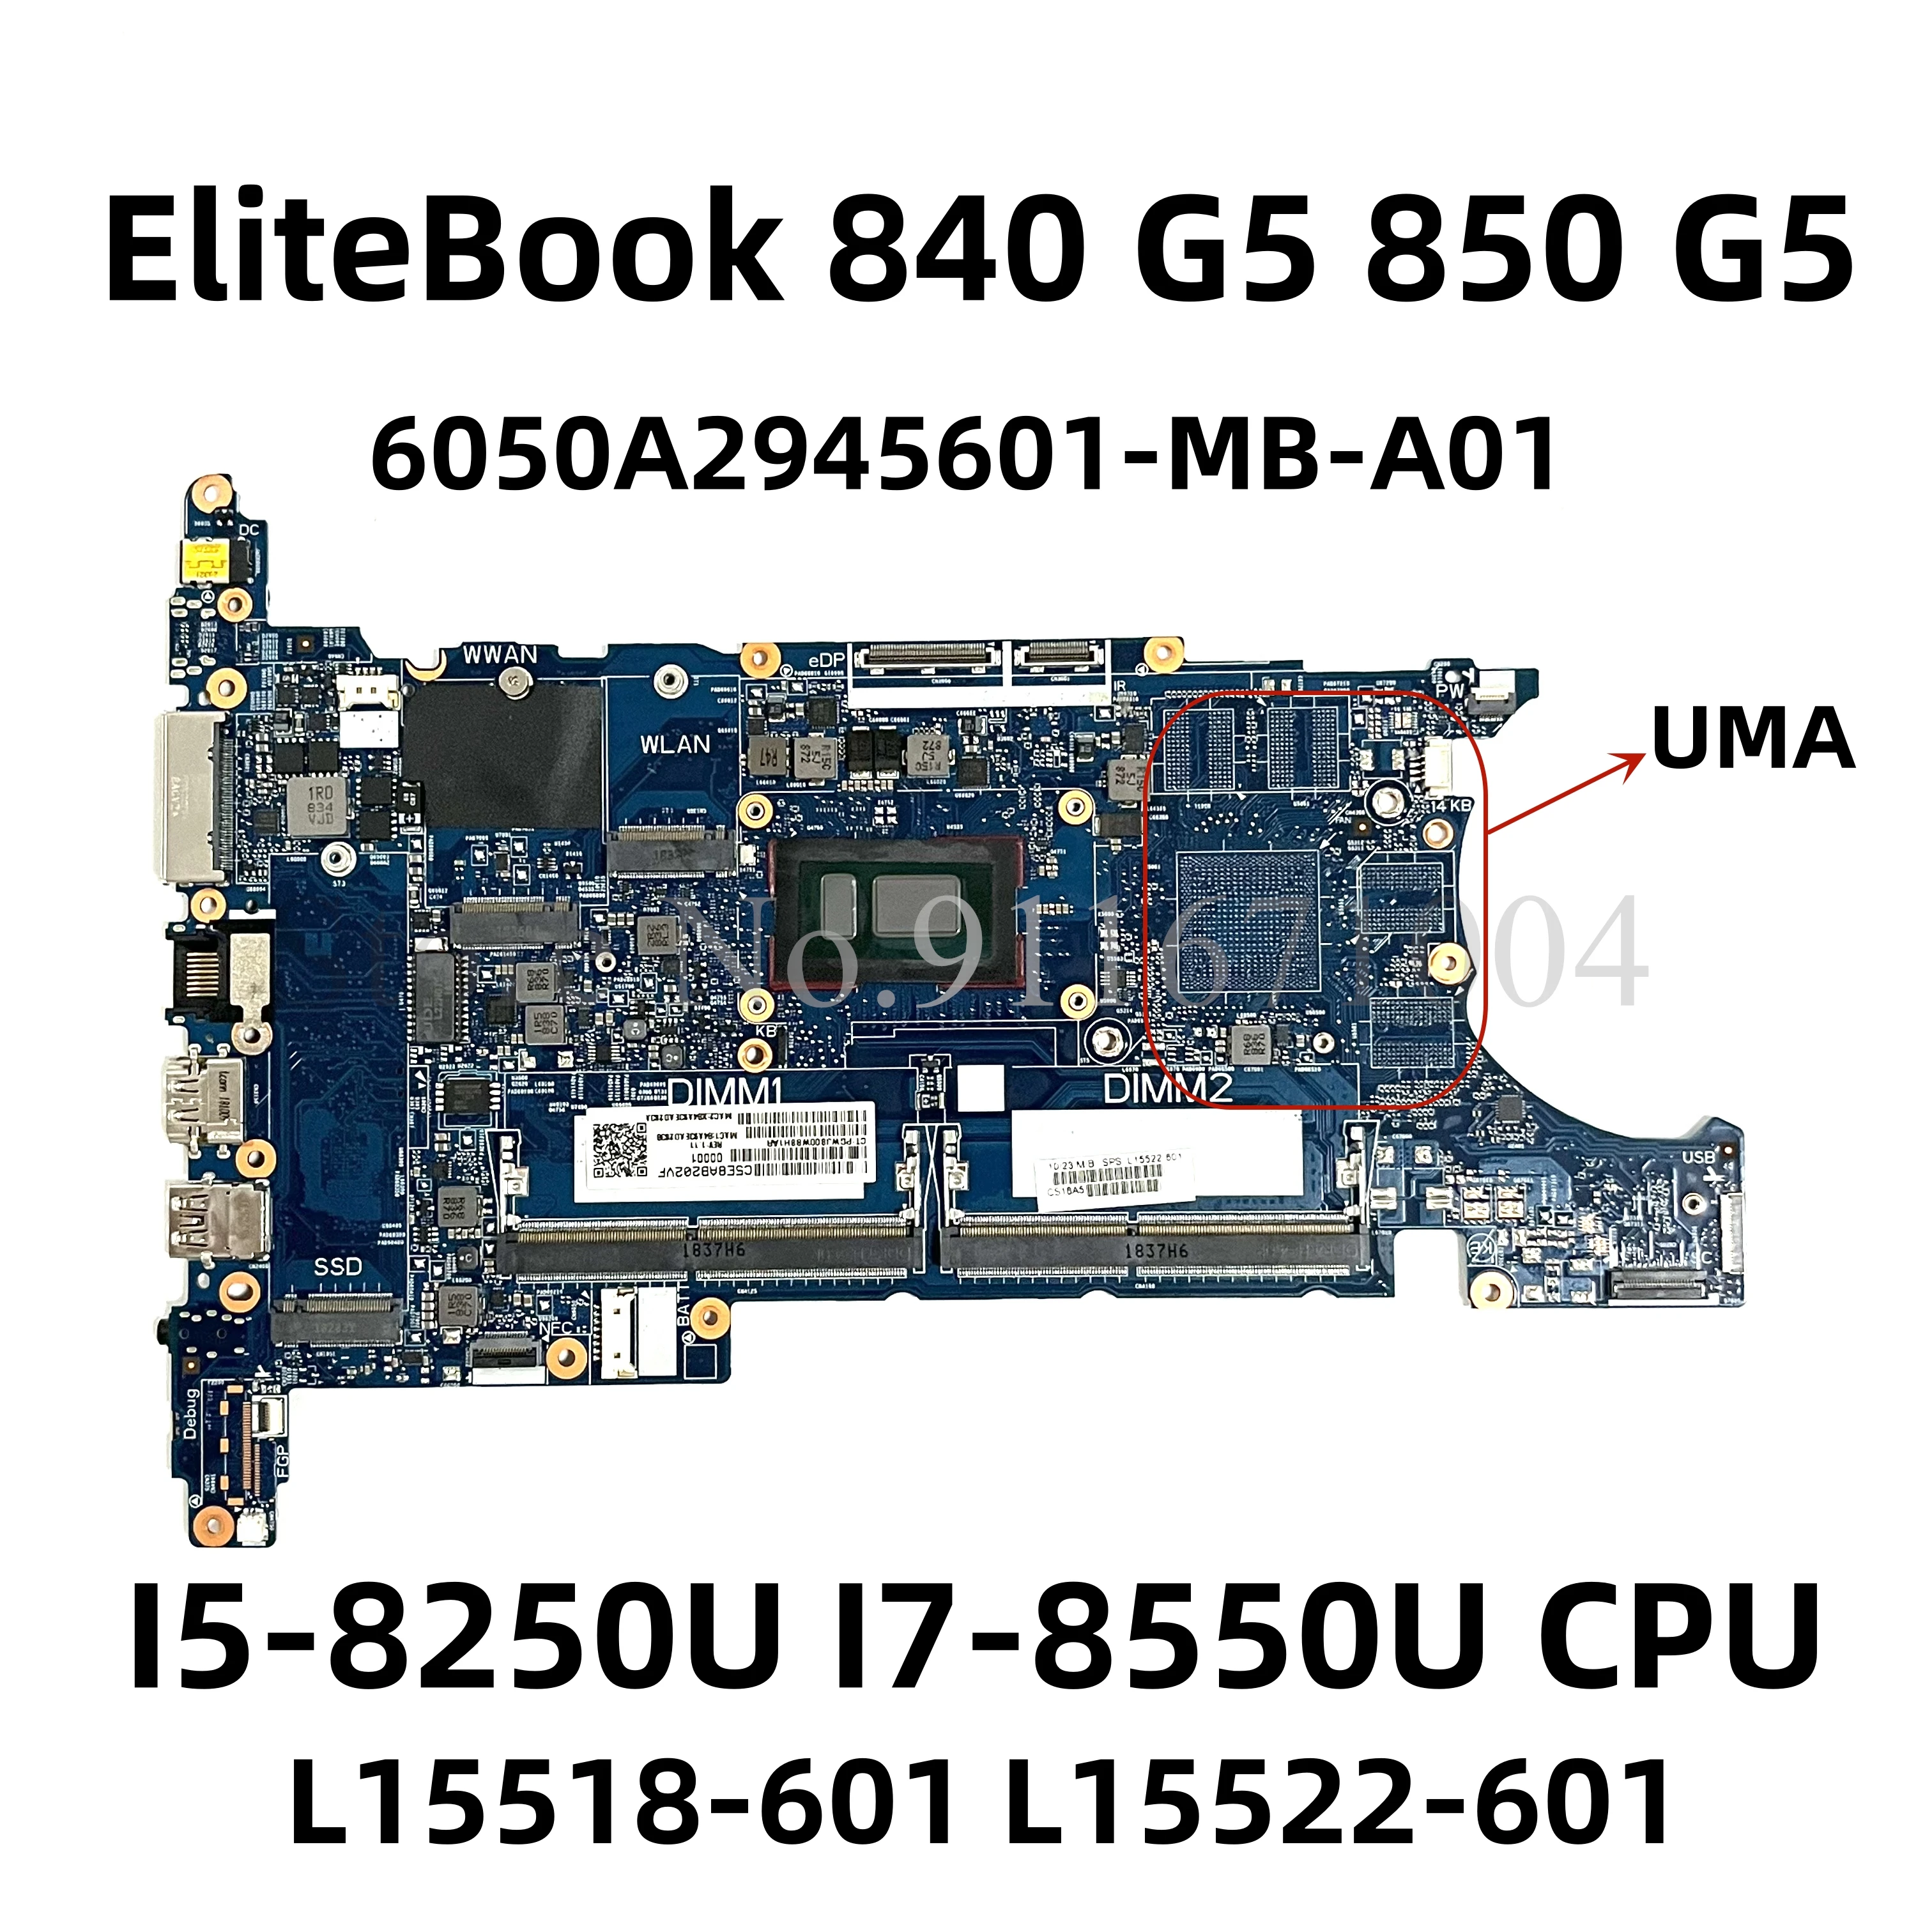 

L15518-601 L15522-601 6050A2945601-MB-A01 For HP EliteBook 840 G5 850 G5 Laptop Motherboard With I5 I7 7/8th CPU DDR4 Mainboard